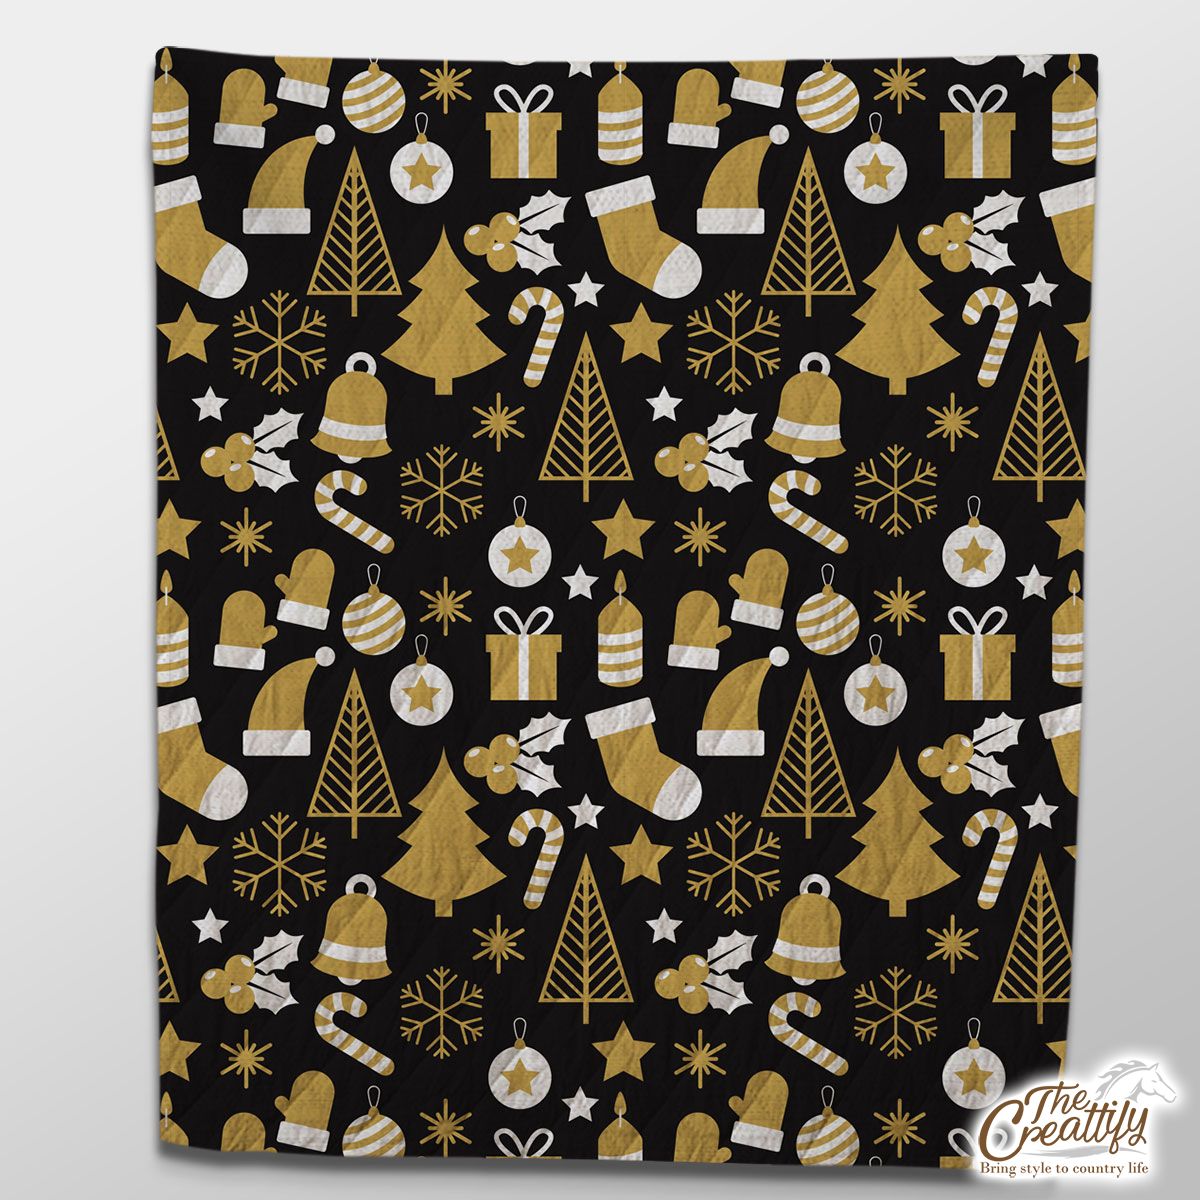 White And Gold Christmas Socks, Christmas Tree, Candy Cane On Black Background Quilt